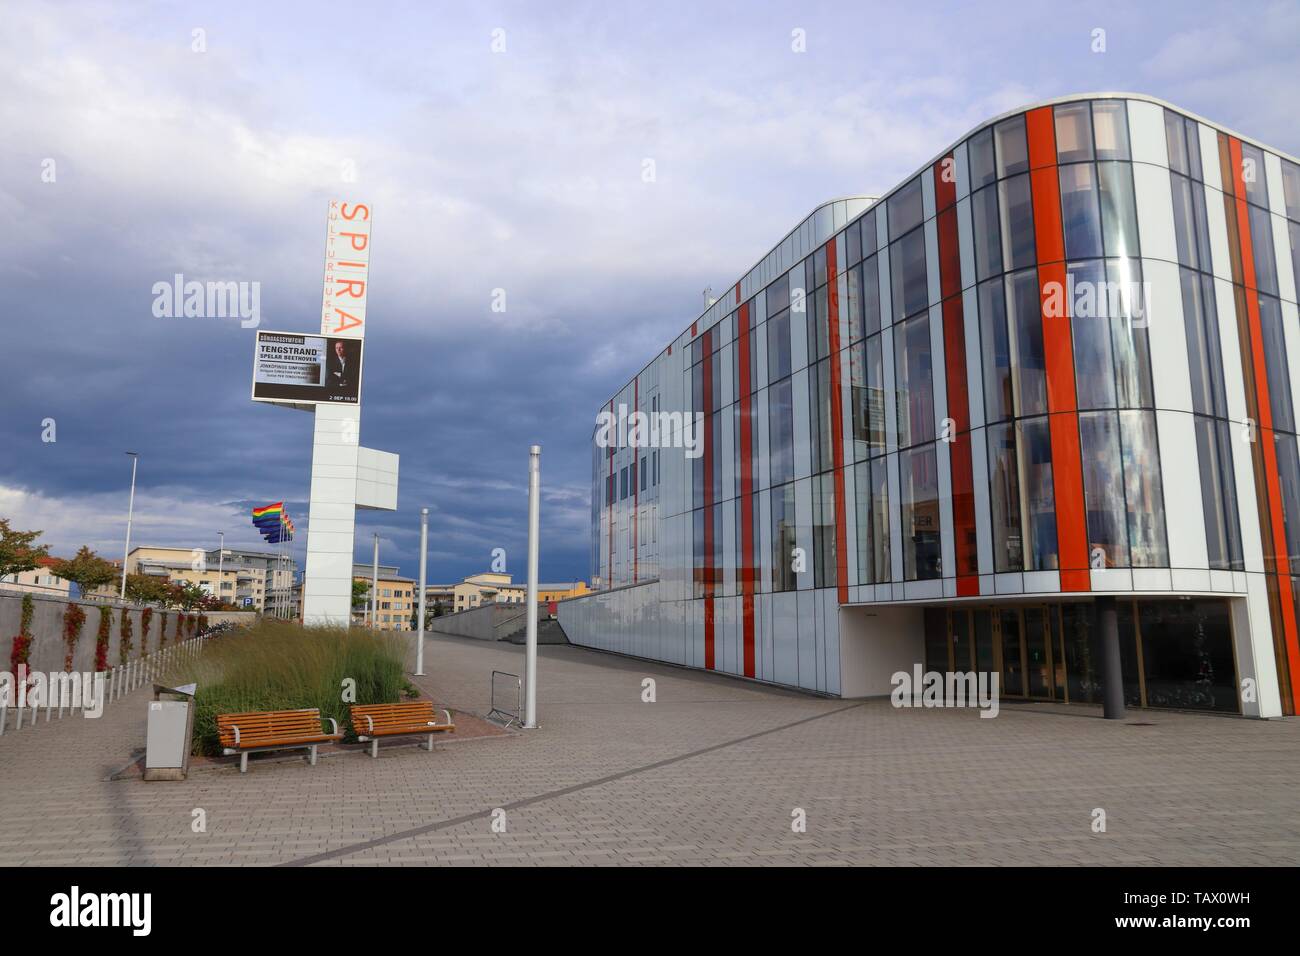 JONKOPING, SWEDEN - AUGUST 25, 2018: Culture House Spira (Kulturhuset Spira)  in Jonkoping, Sweden. The modern building opened in 2011 and houses theat  Stock Photo - Alamy